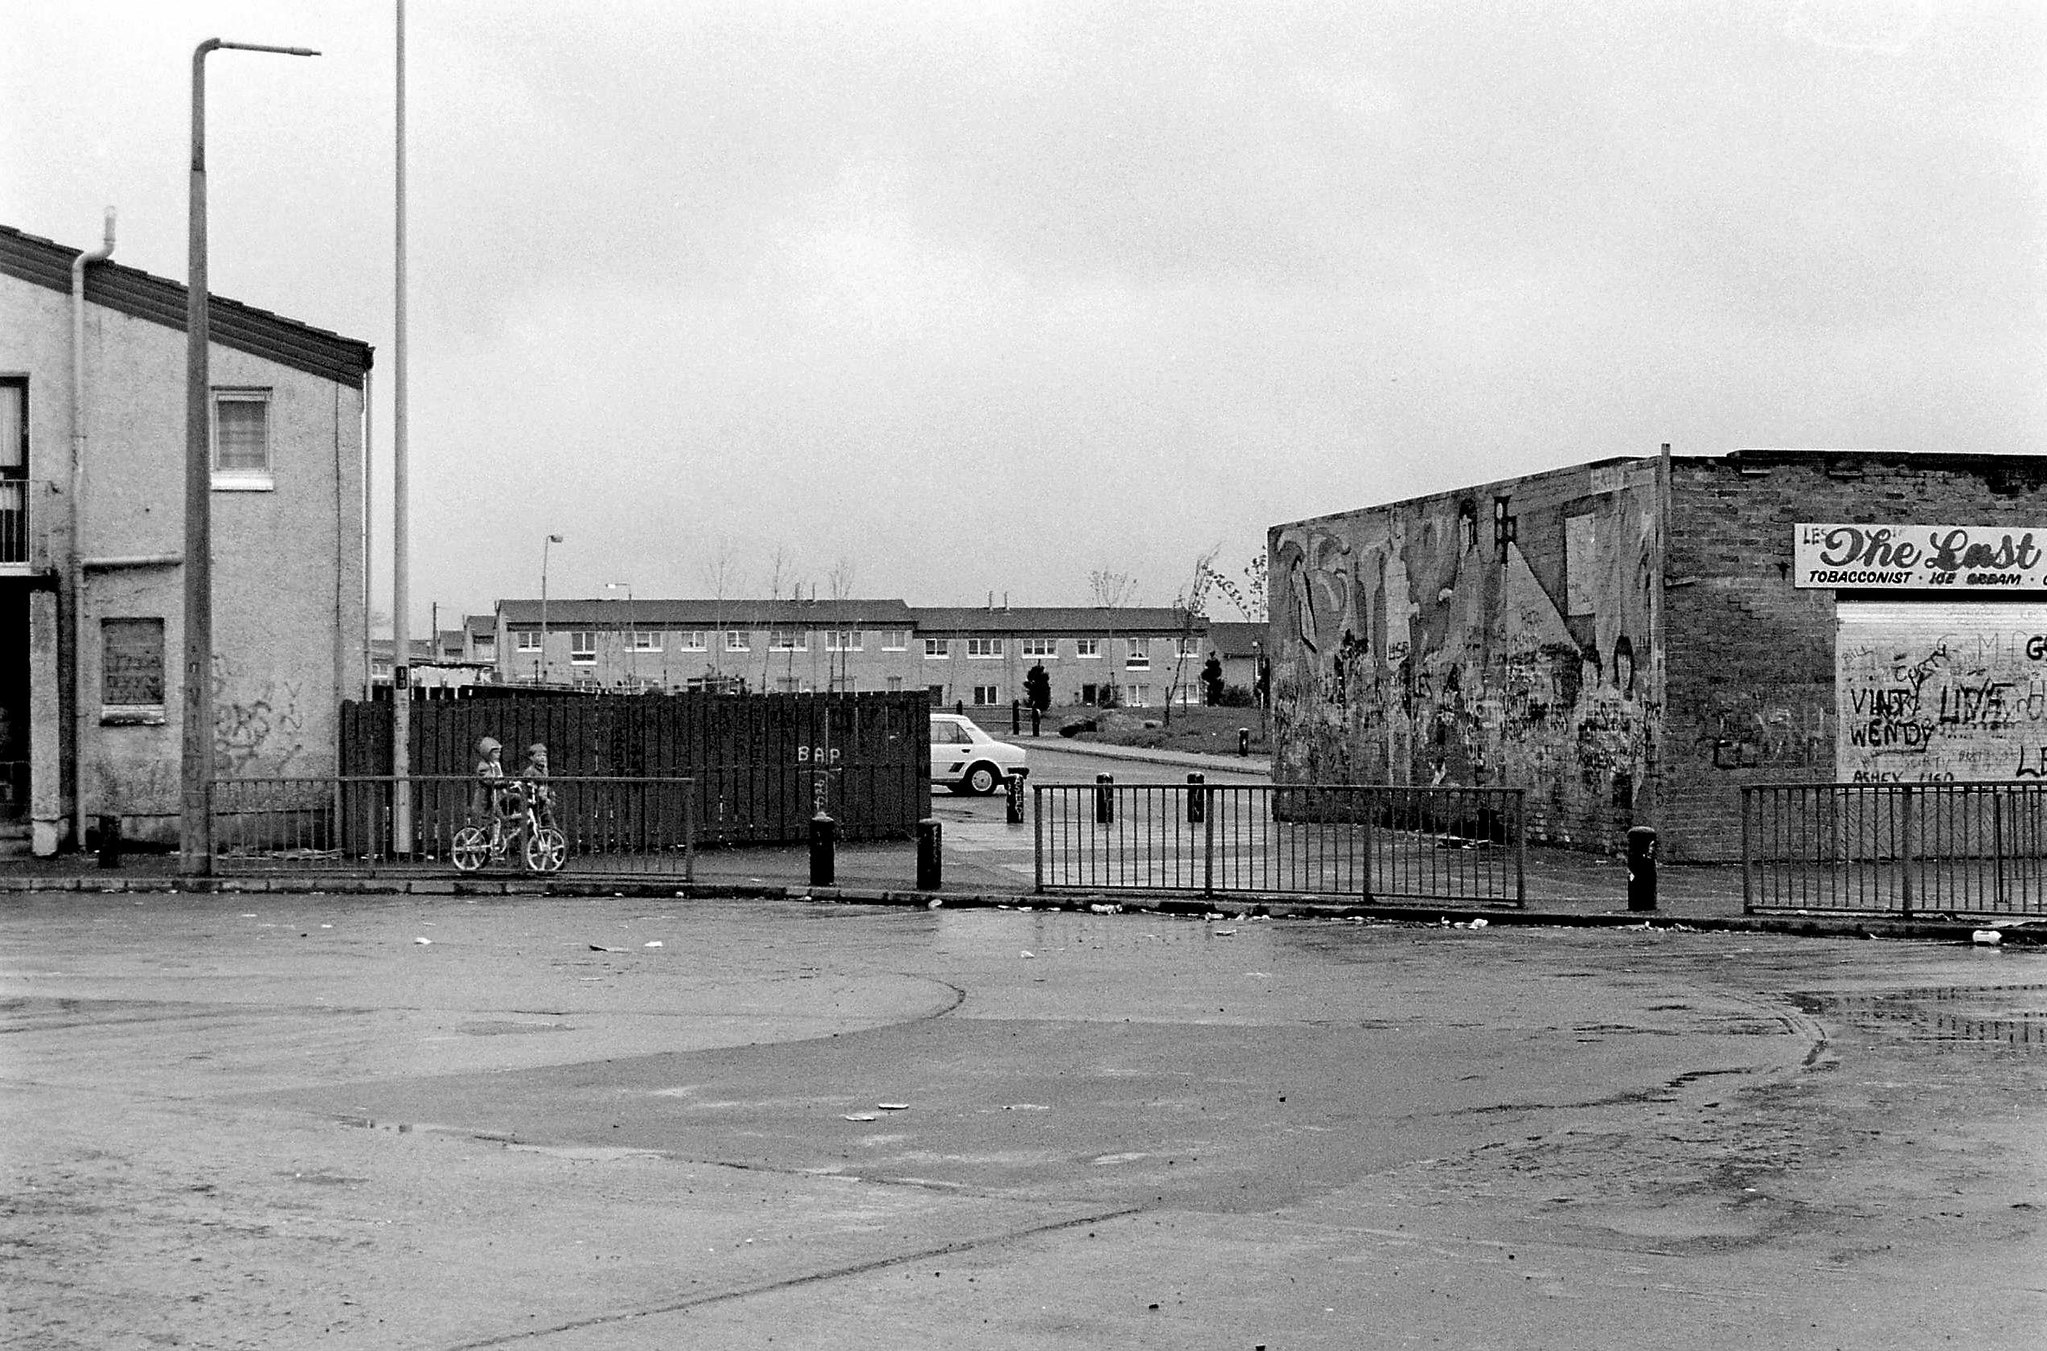 Belfast in April and May 1988